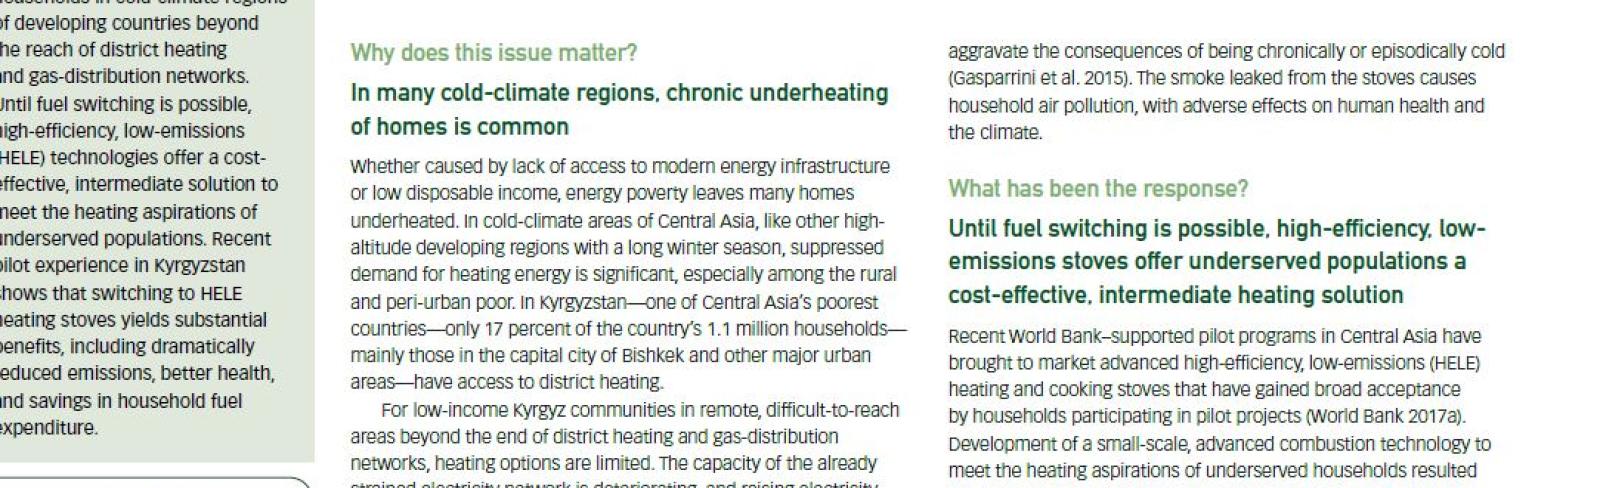 Beyond the Last Mile: Piloting High-Efficiency, Low-Emissions Heating Technologies in Central Asia